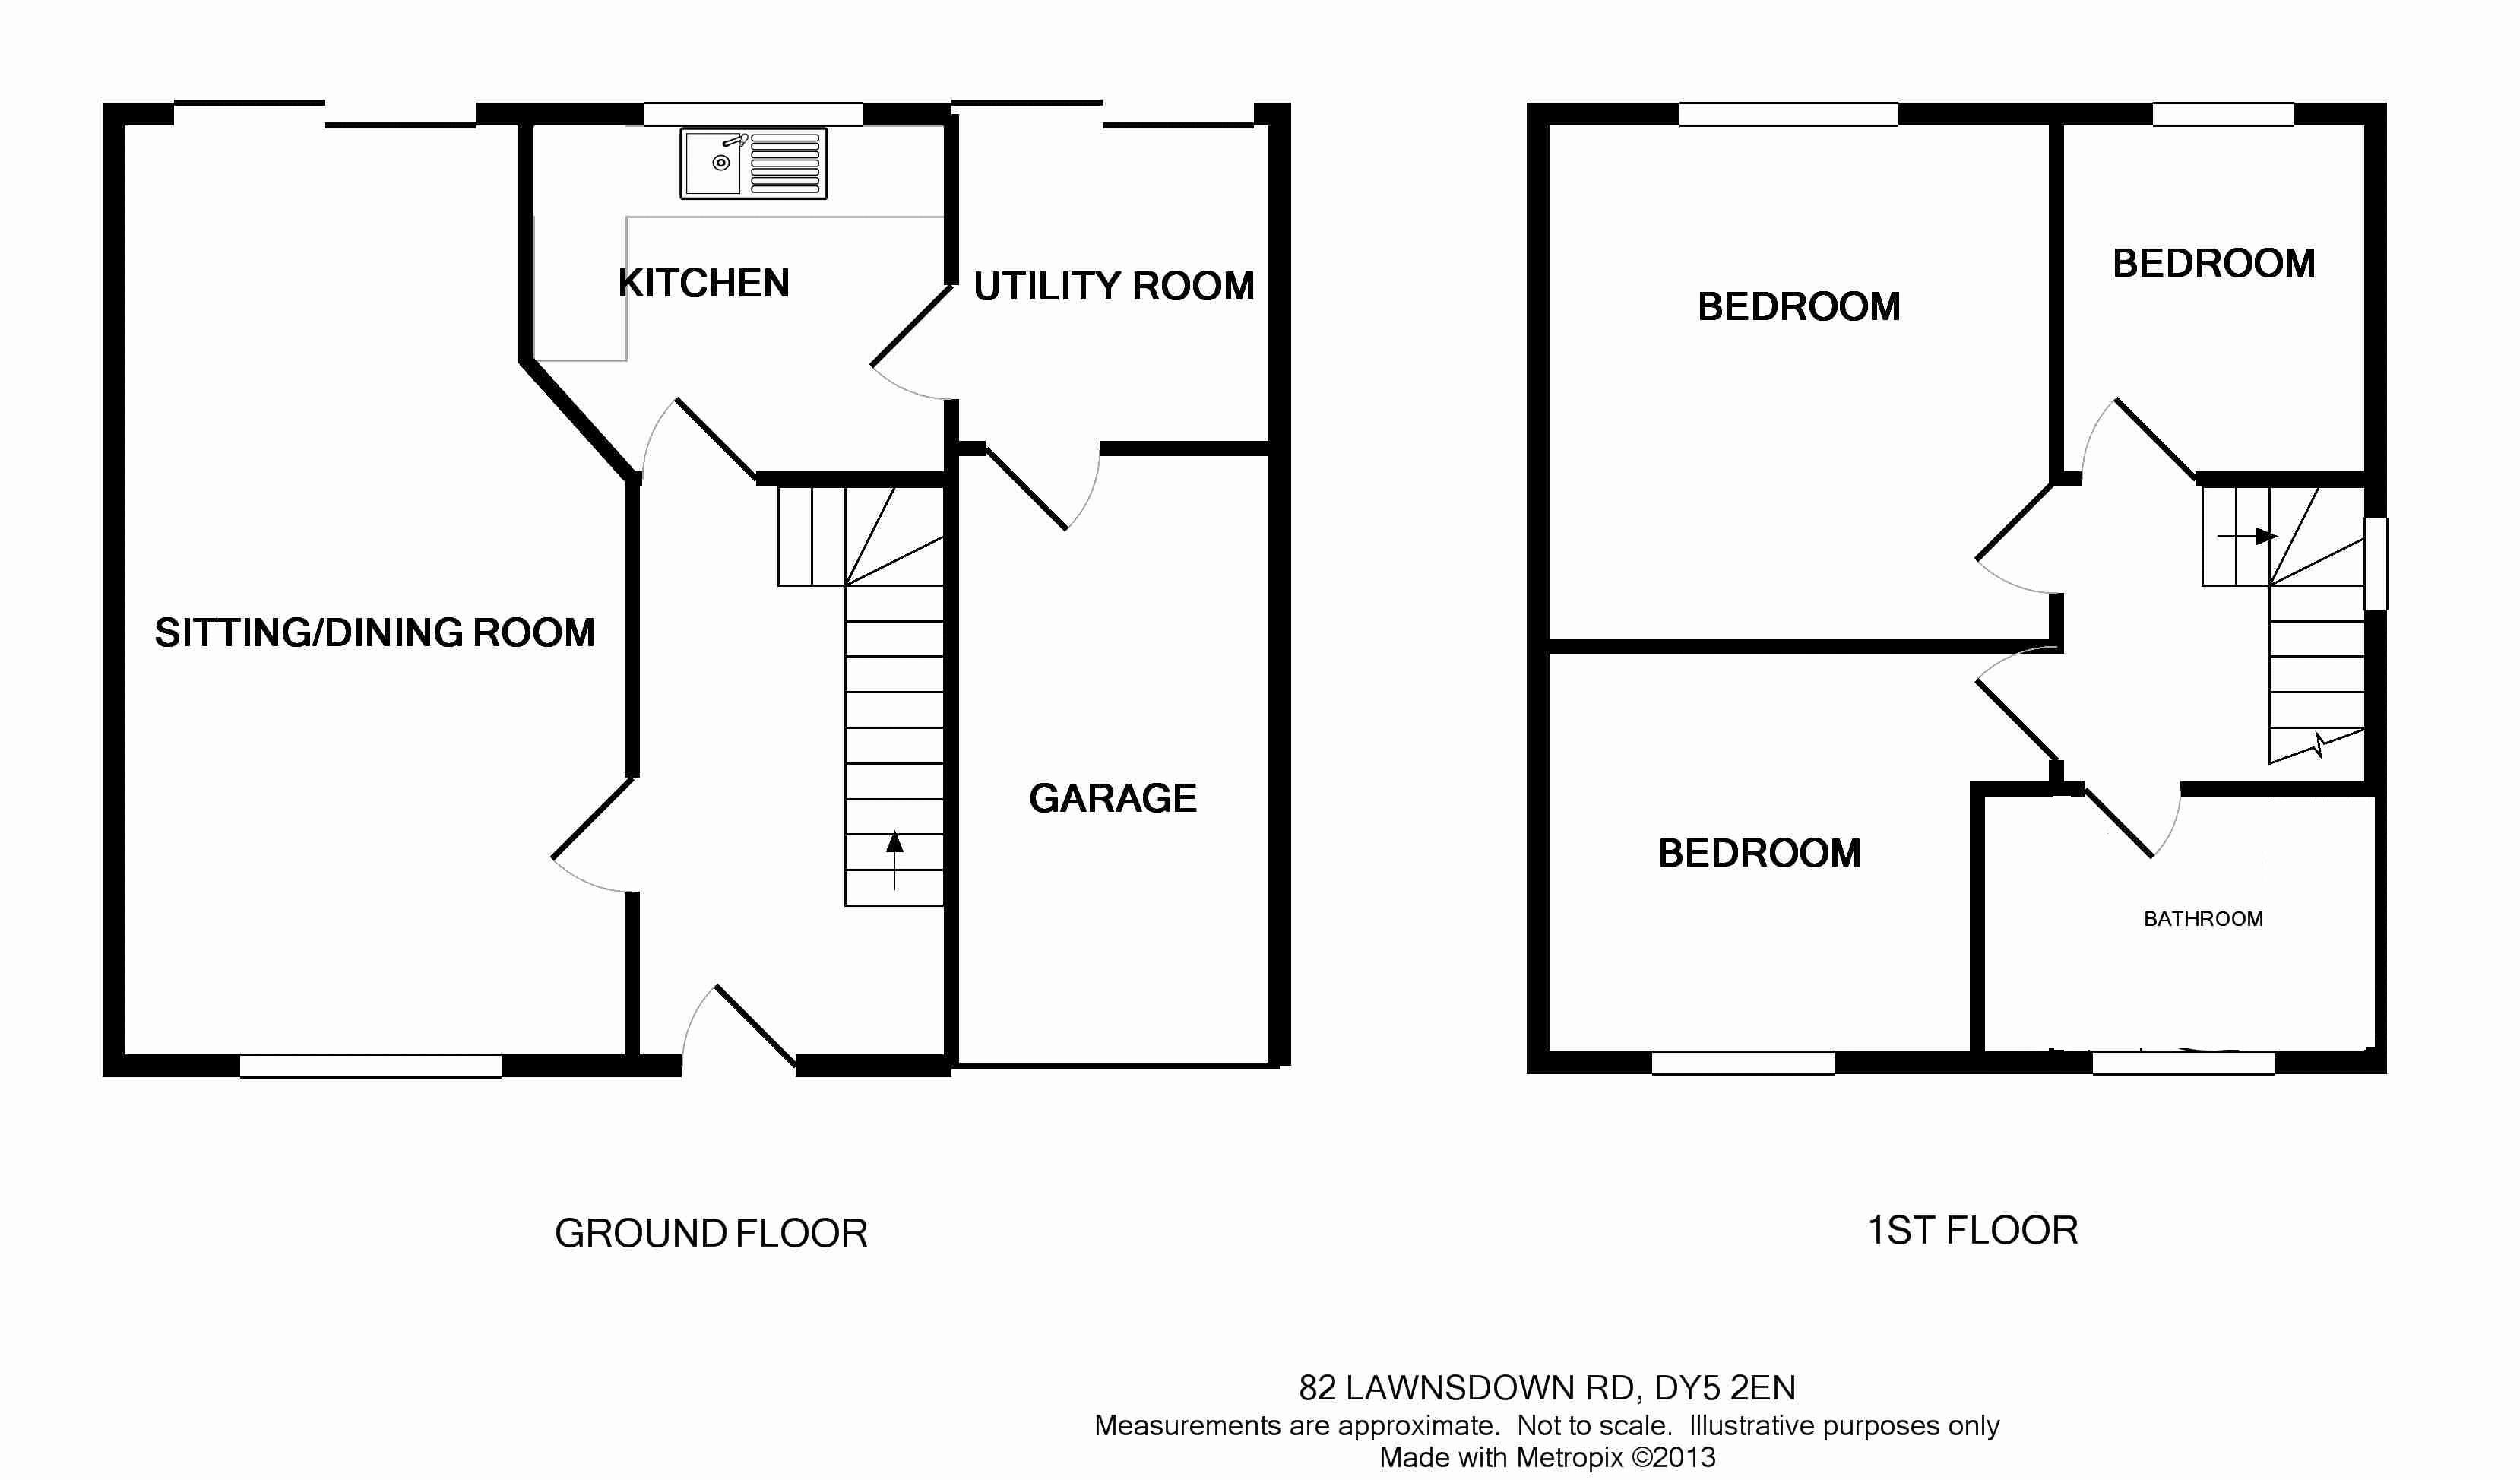 3 Bedrooms Semi-detached house for sale in Brierley Hill, Quarry Bank, Lawnsdown Road DY5